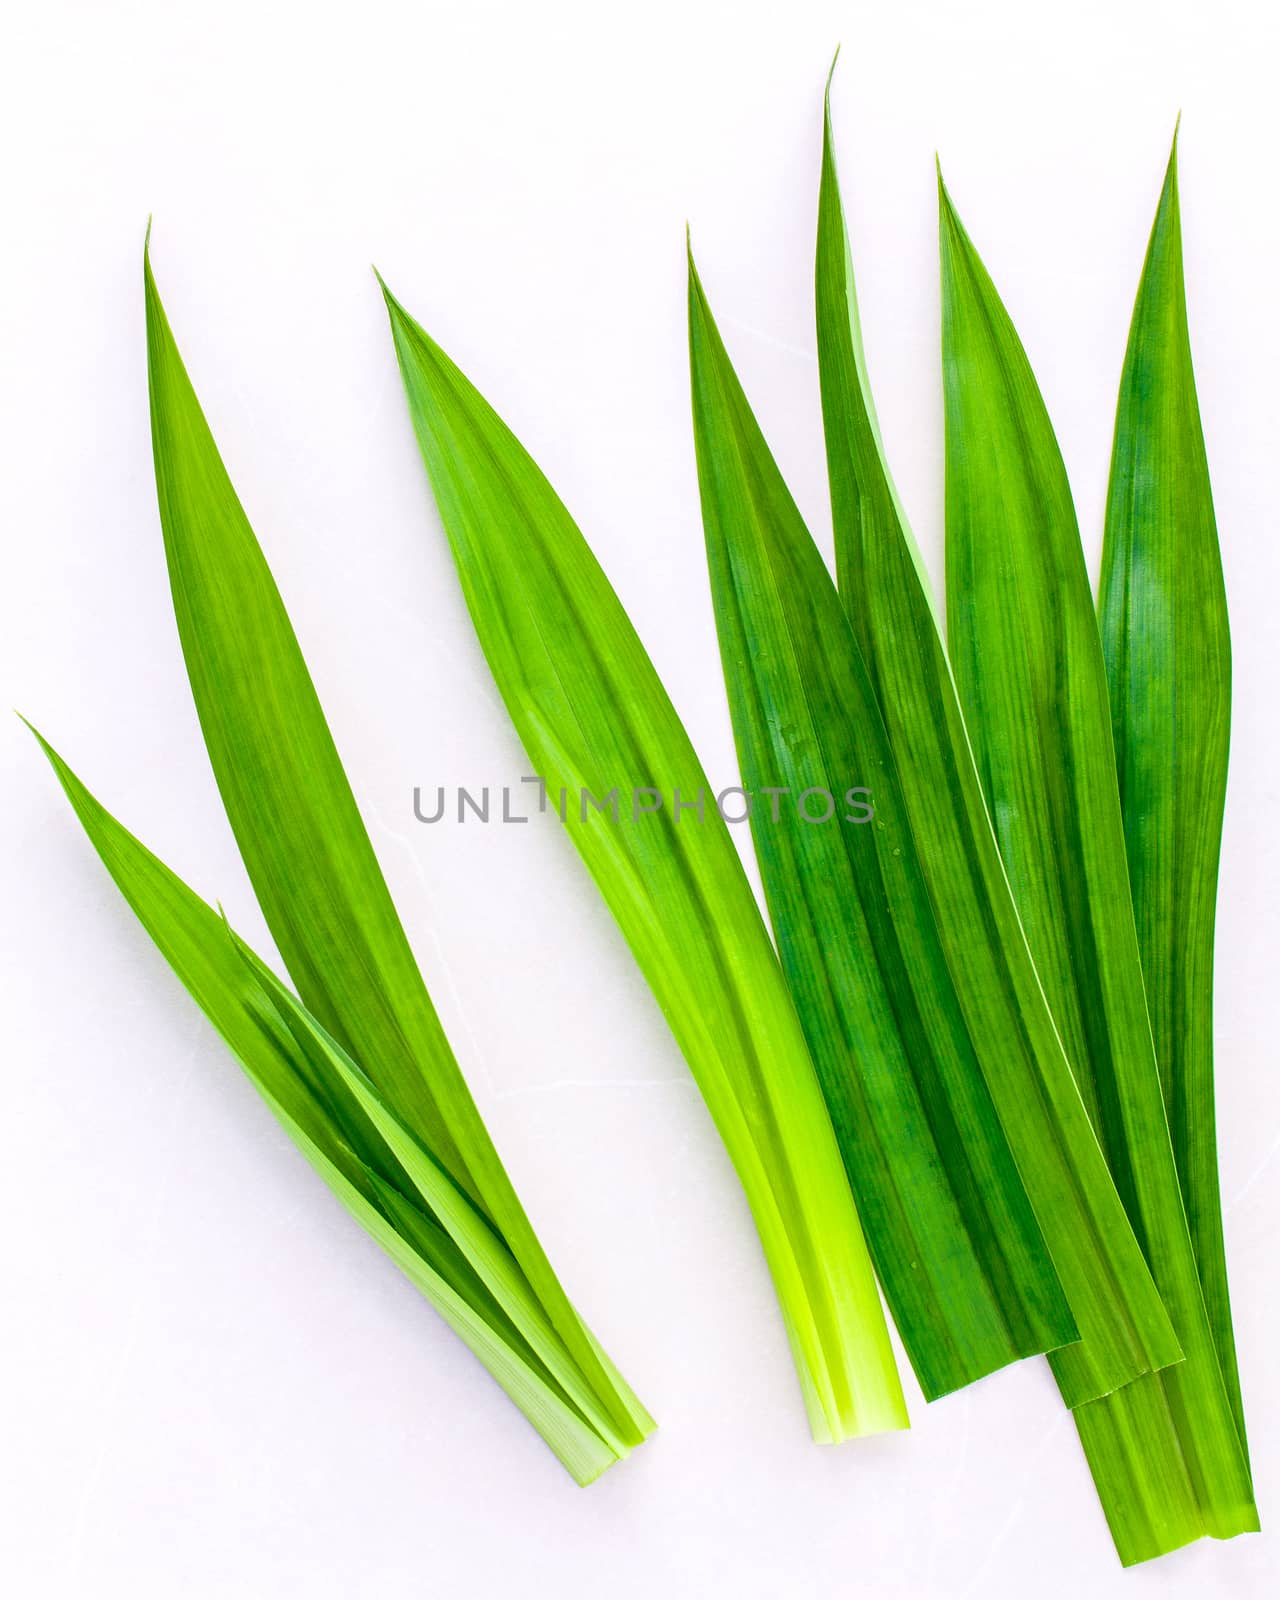 Pandan leaves 's herbal ingredient for dessert ,tea and aromatherapy. Sweet and earthy aroma .